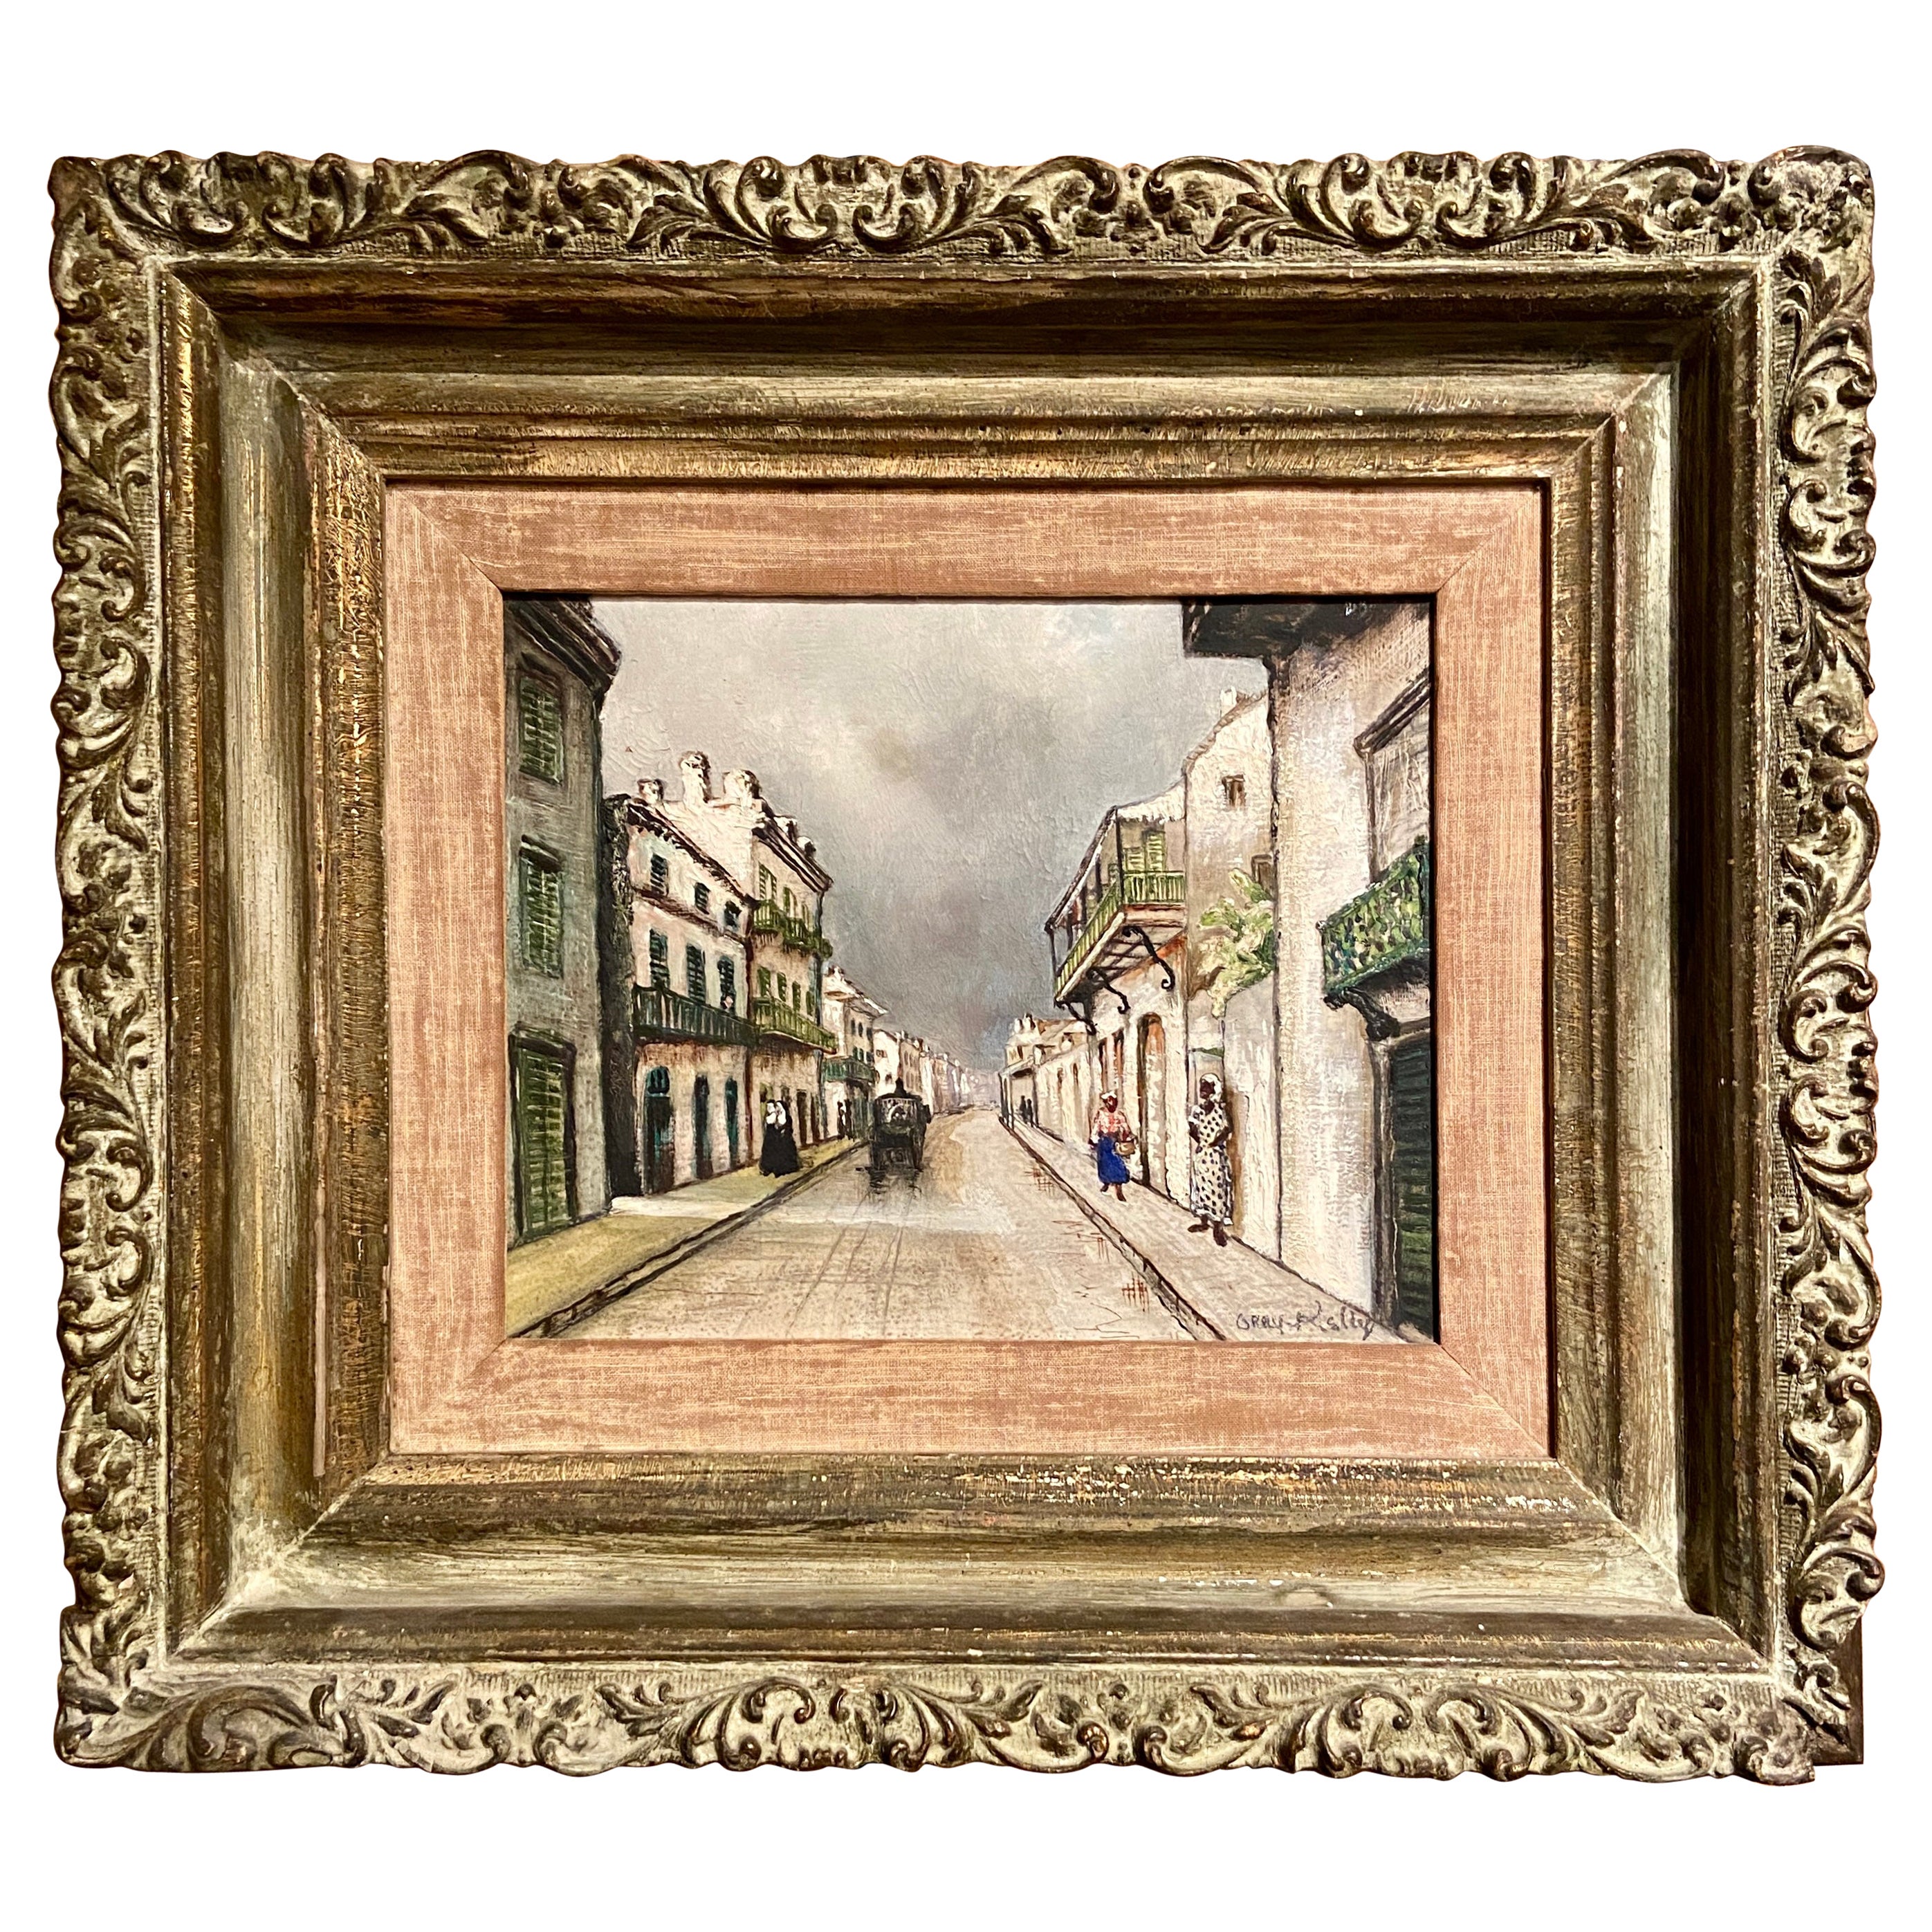 Antique Early 20th Century American Oil Painting on Board "Rue Royale."